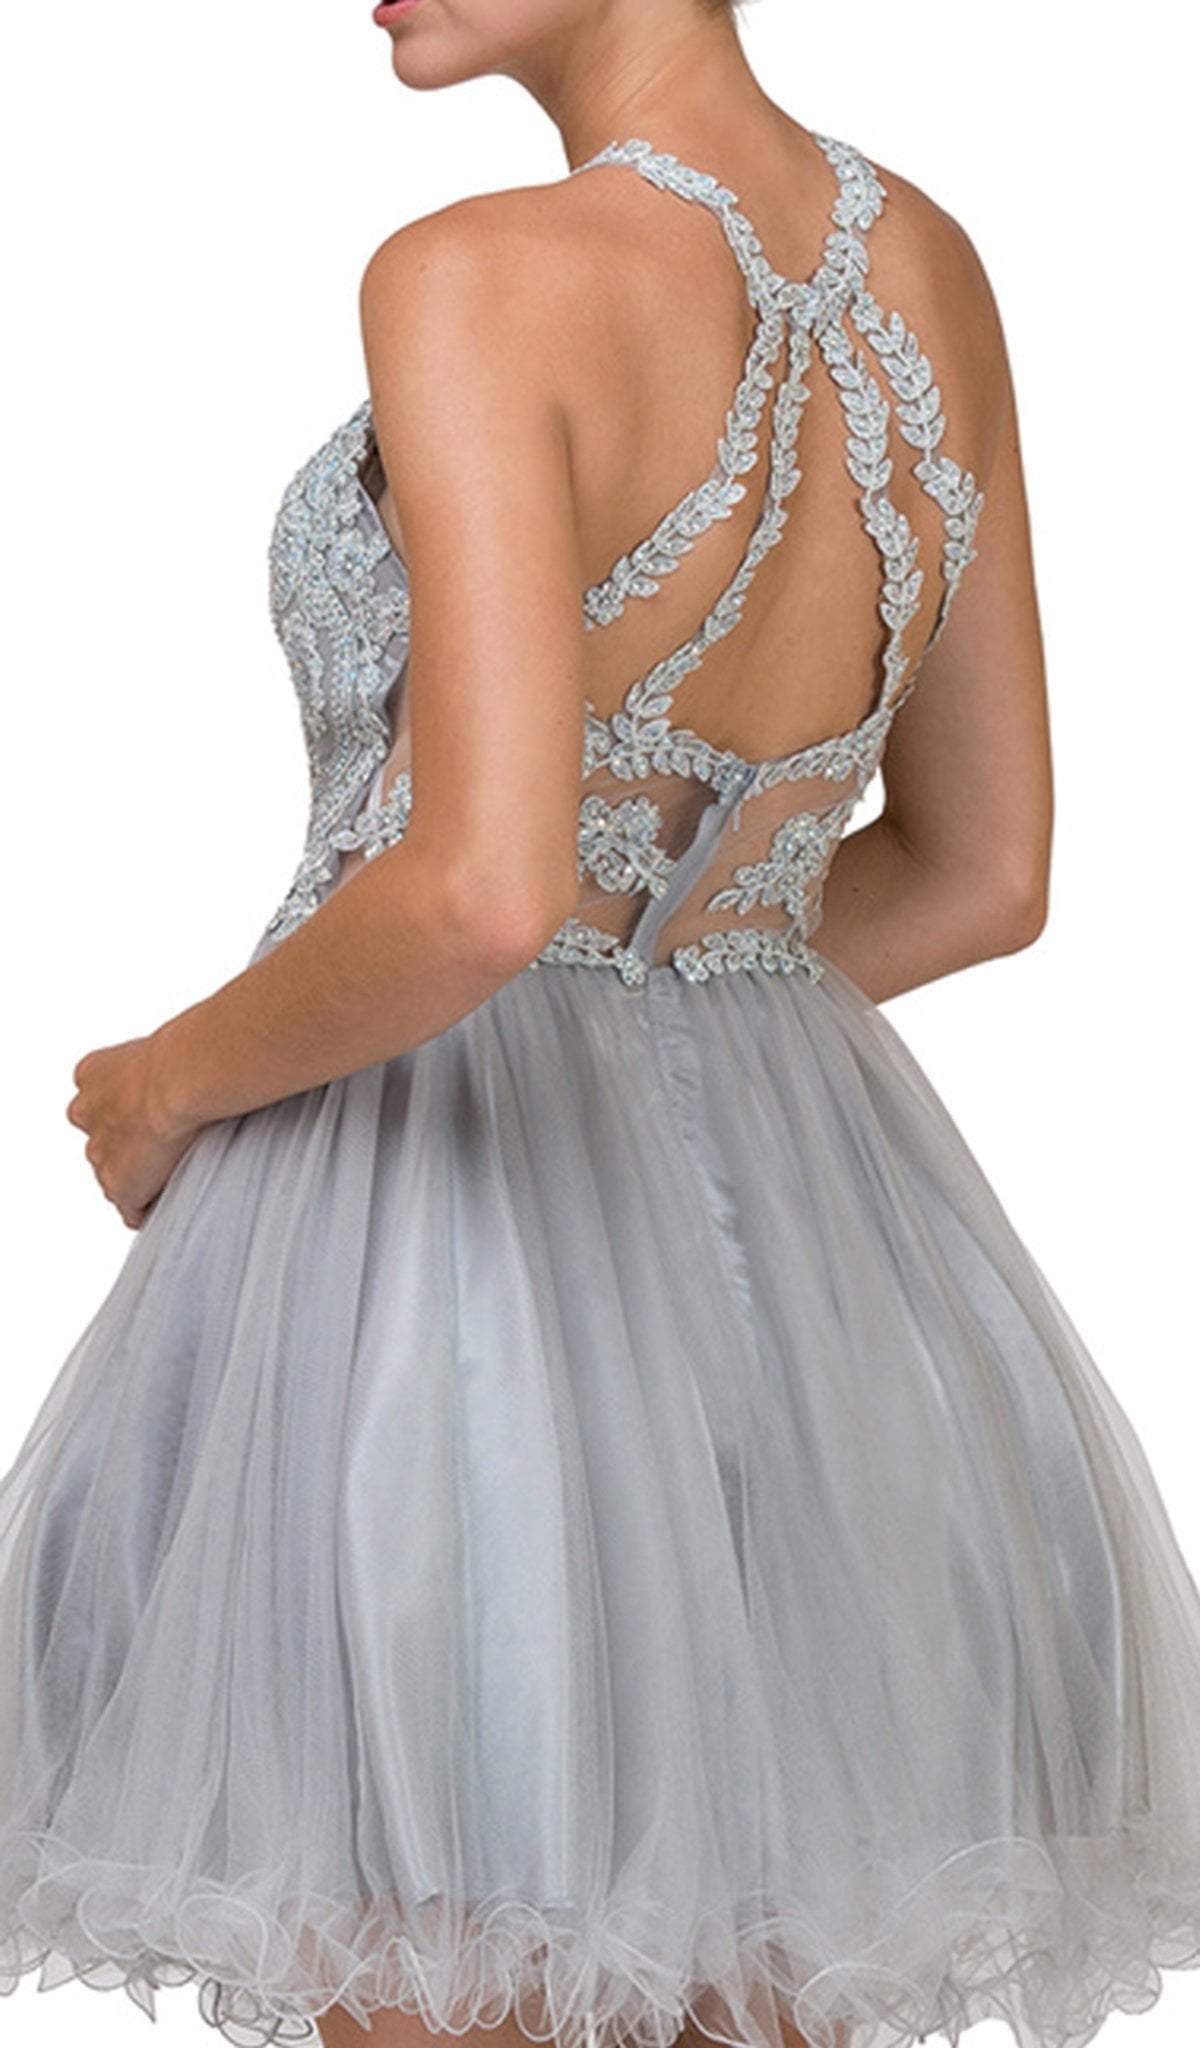 Dancing Queen - 2156 Halter Floral Appliques Tulle Cocktail Dress Special Occasion Dress